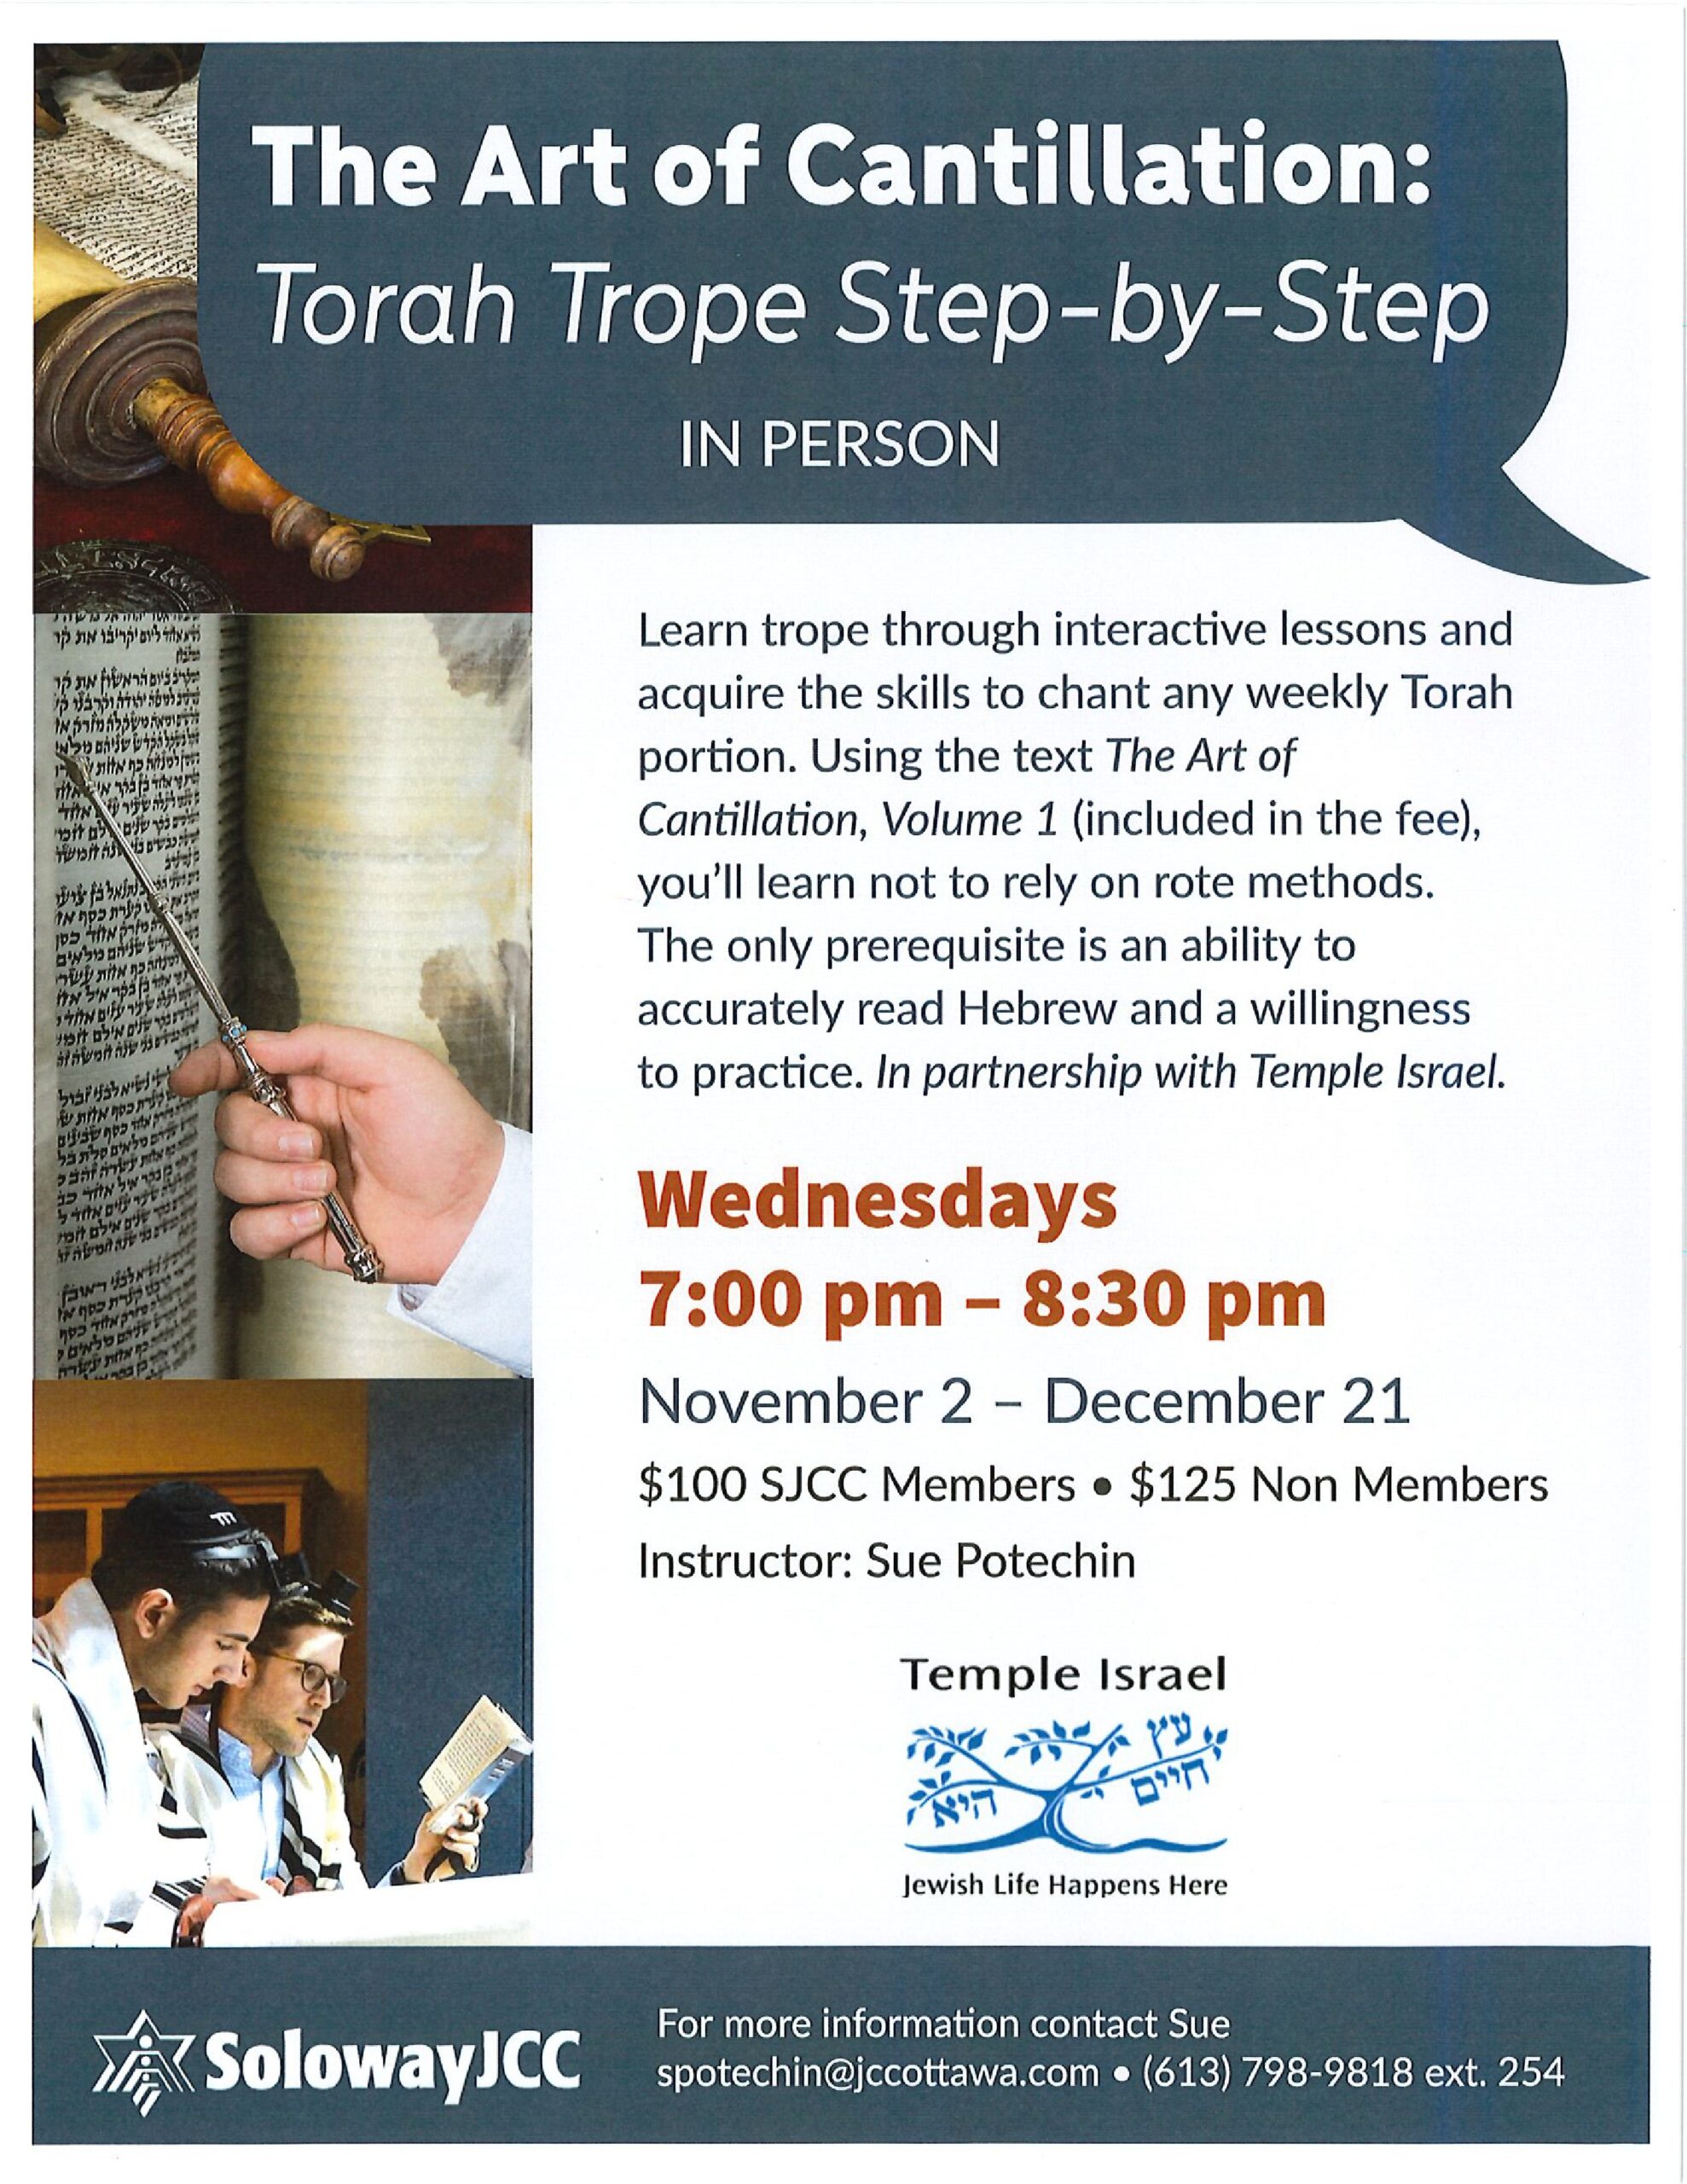 The Art of Cantillation: Torah Trope Step-by-Step